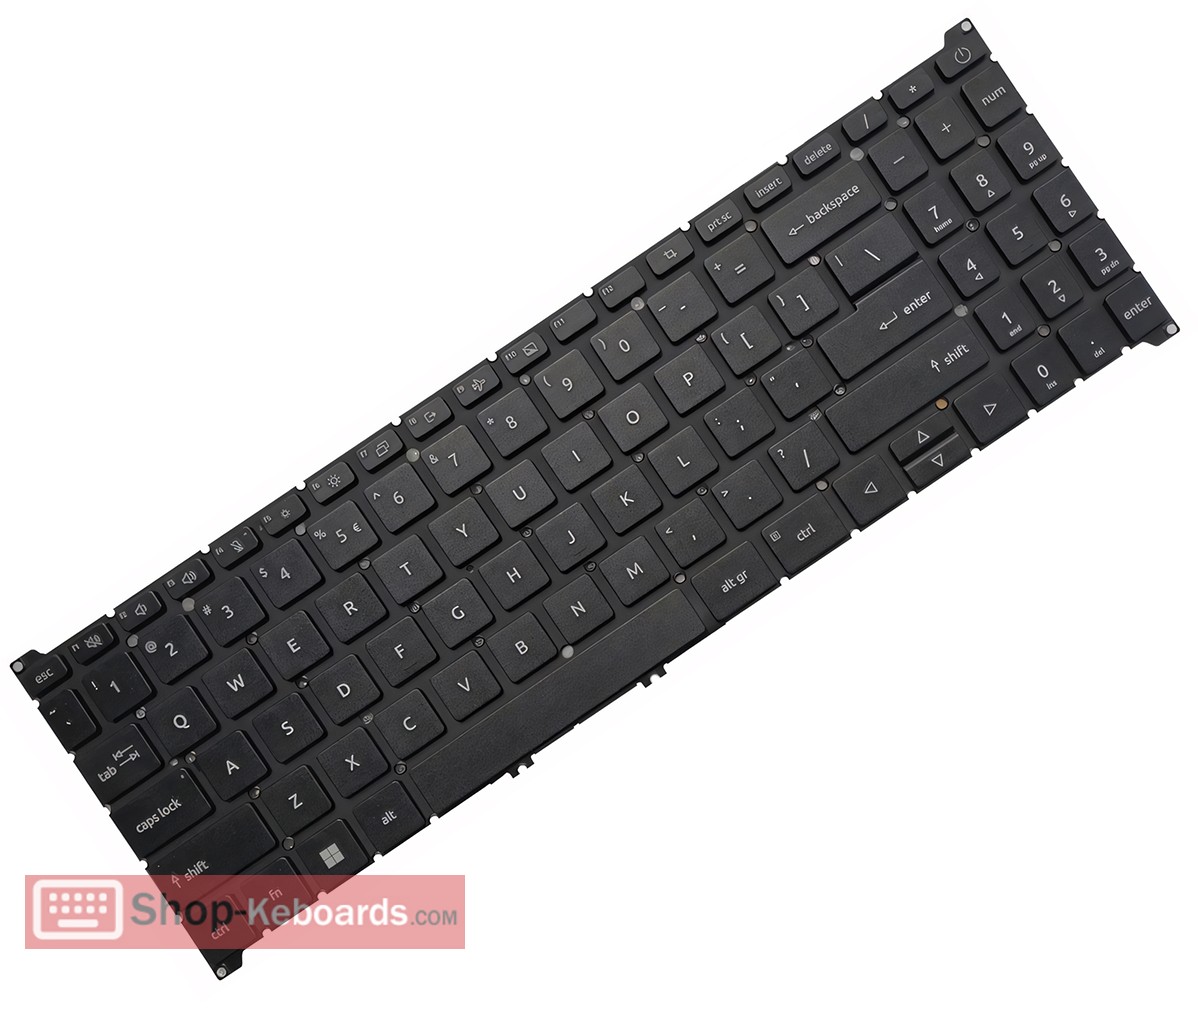 Acer ASPIRE A715-76  Keyboard replacement